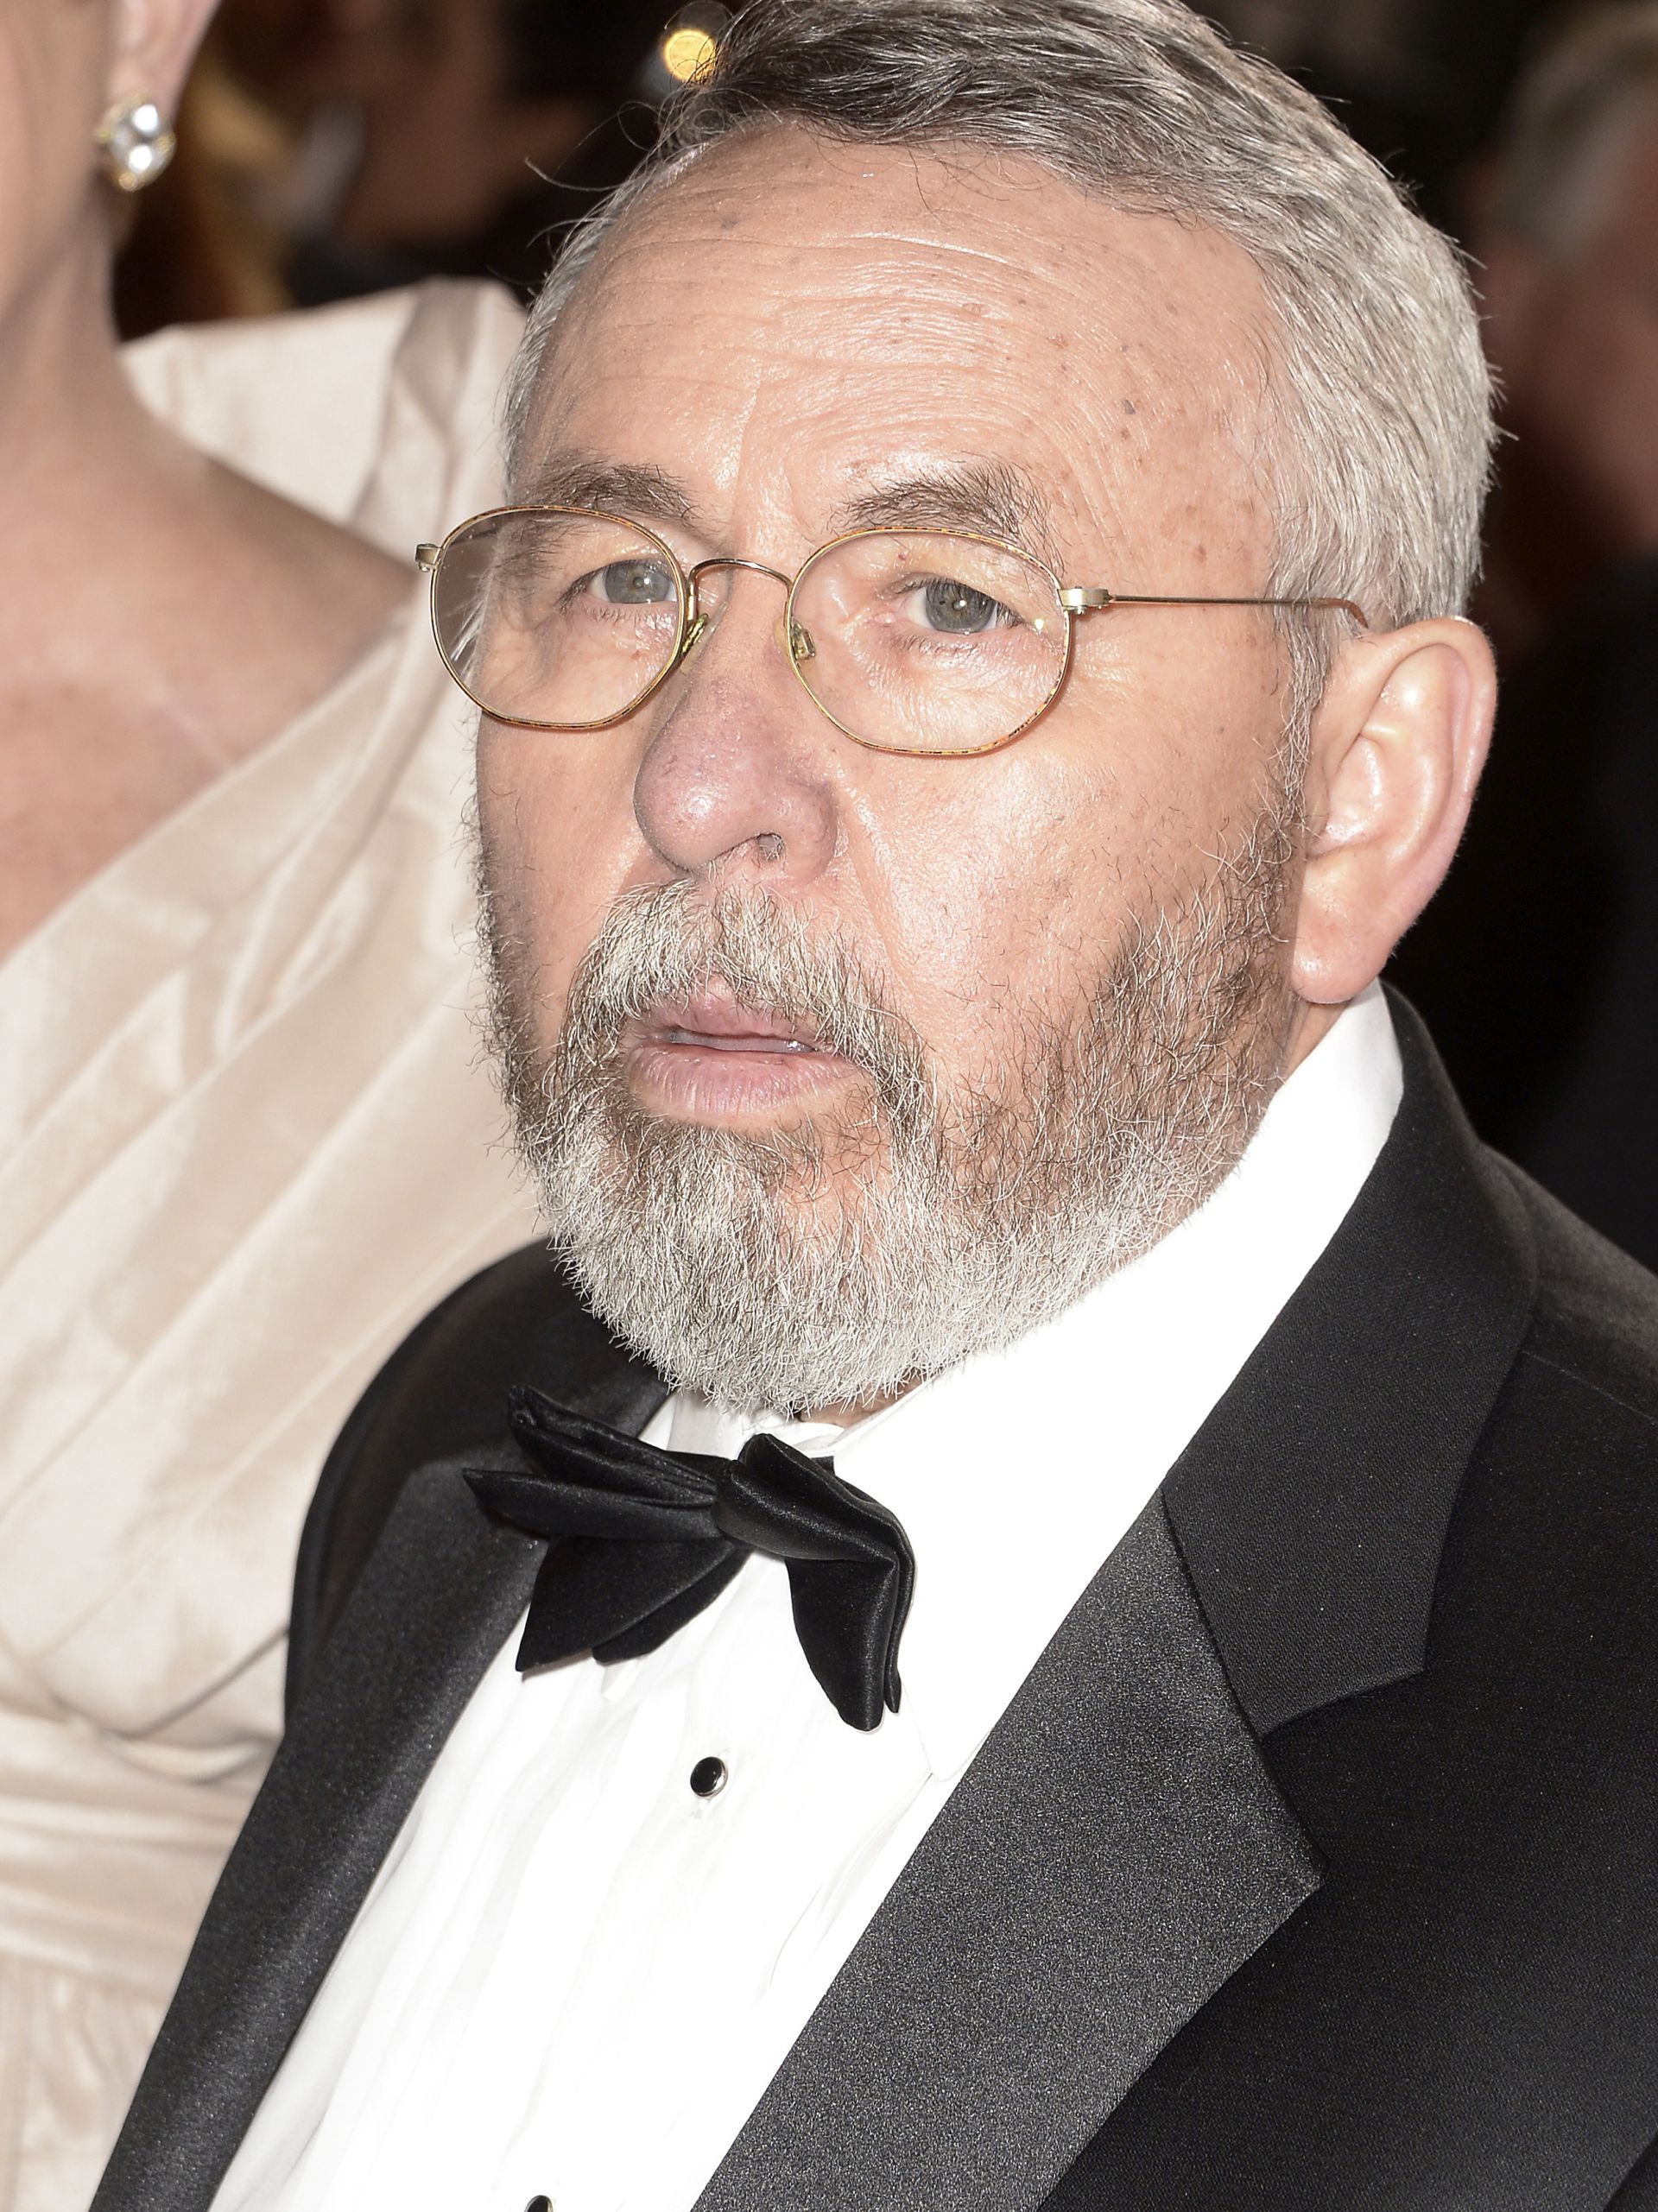 epa07304121 (FILE) - US writer and former CIA operative Tony Mendez arrives on the red carpet for the 85th Academy Awards at the Dolby Theatre in Hollywood, California, USA, 24 February 2013 (reissued 20 January 2019). According to media reports, Tony Mendez has died aged 78 on 19 January 2019. Tony Mendez rescued six US diplomats who were given shelter by the Canadian Embassy in Tehran, Iran after the US Embassy had been stormed by Iranian revolutionaries in 1980. In the Oscar-winning movie Argo, Mendez was portrait by US actor Ben Affleck.  EPA/PAUL BUCK